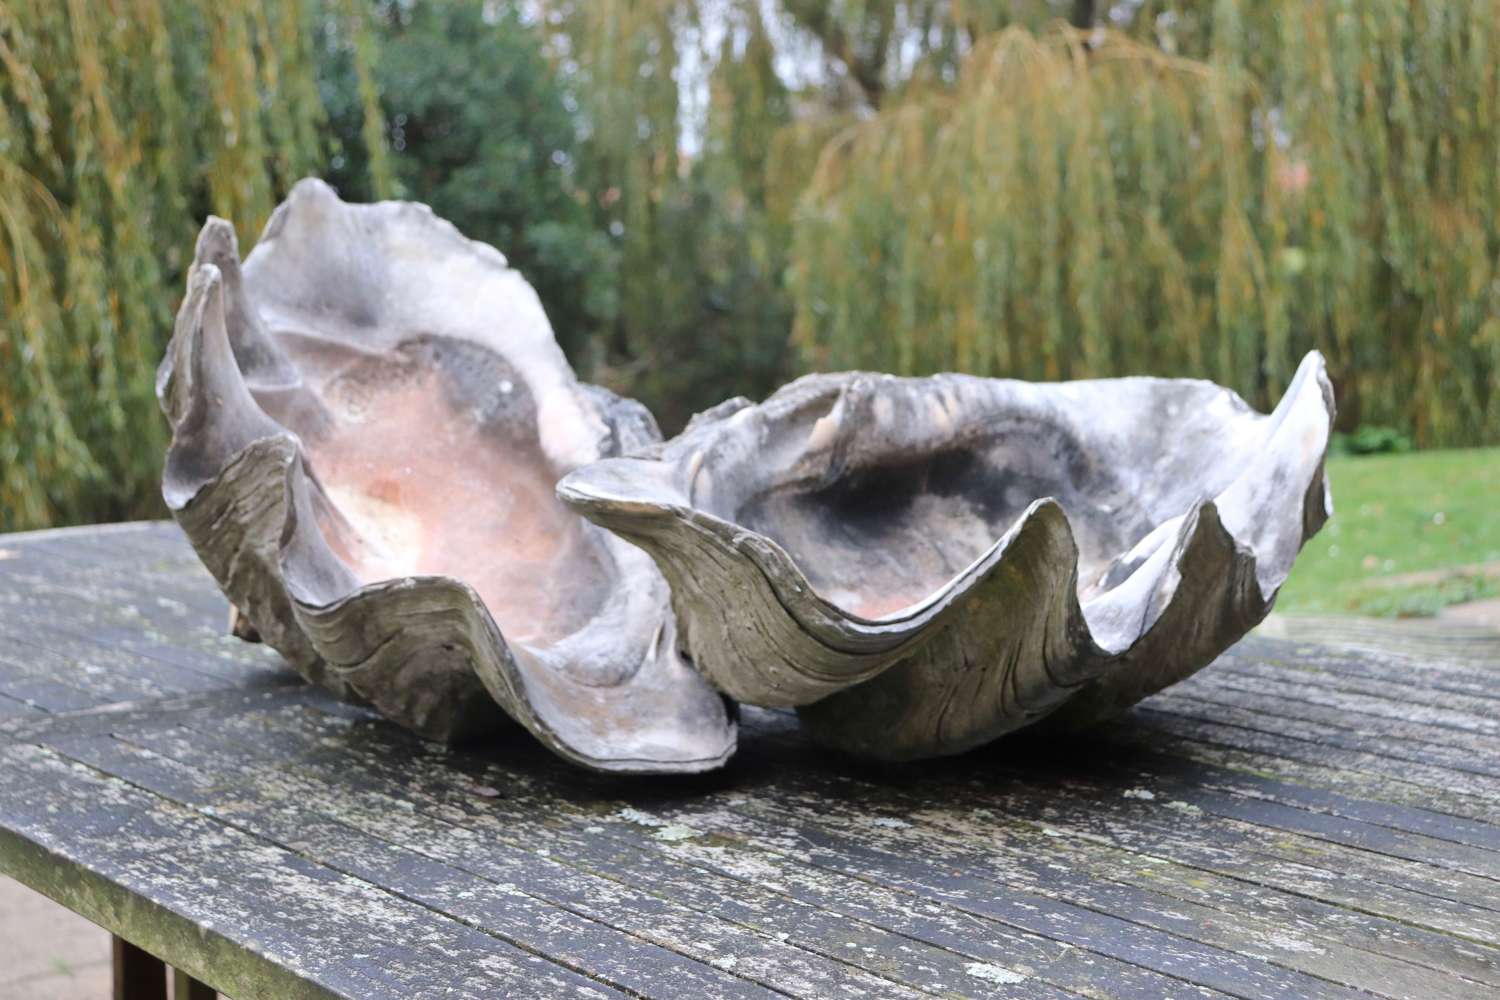 Pair of giant clam shells